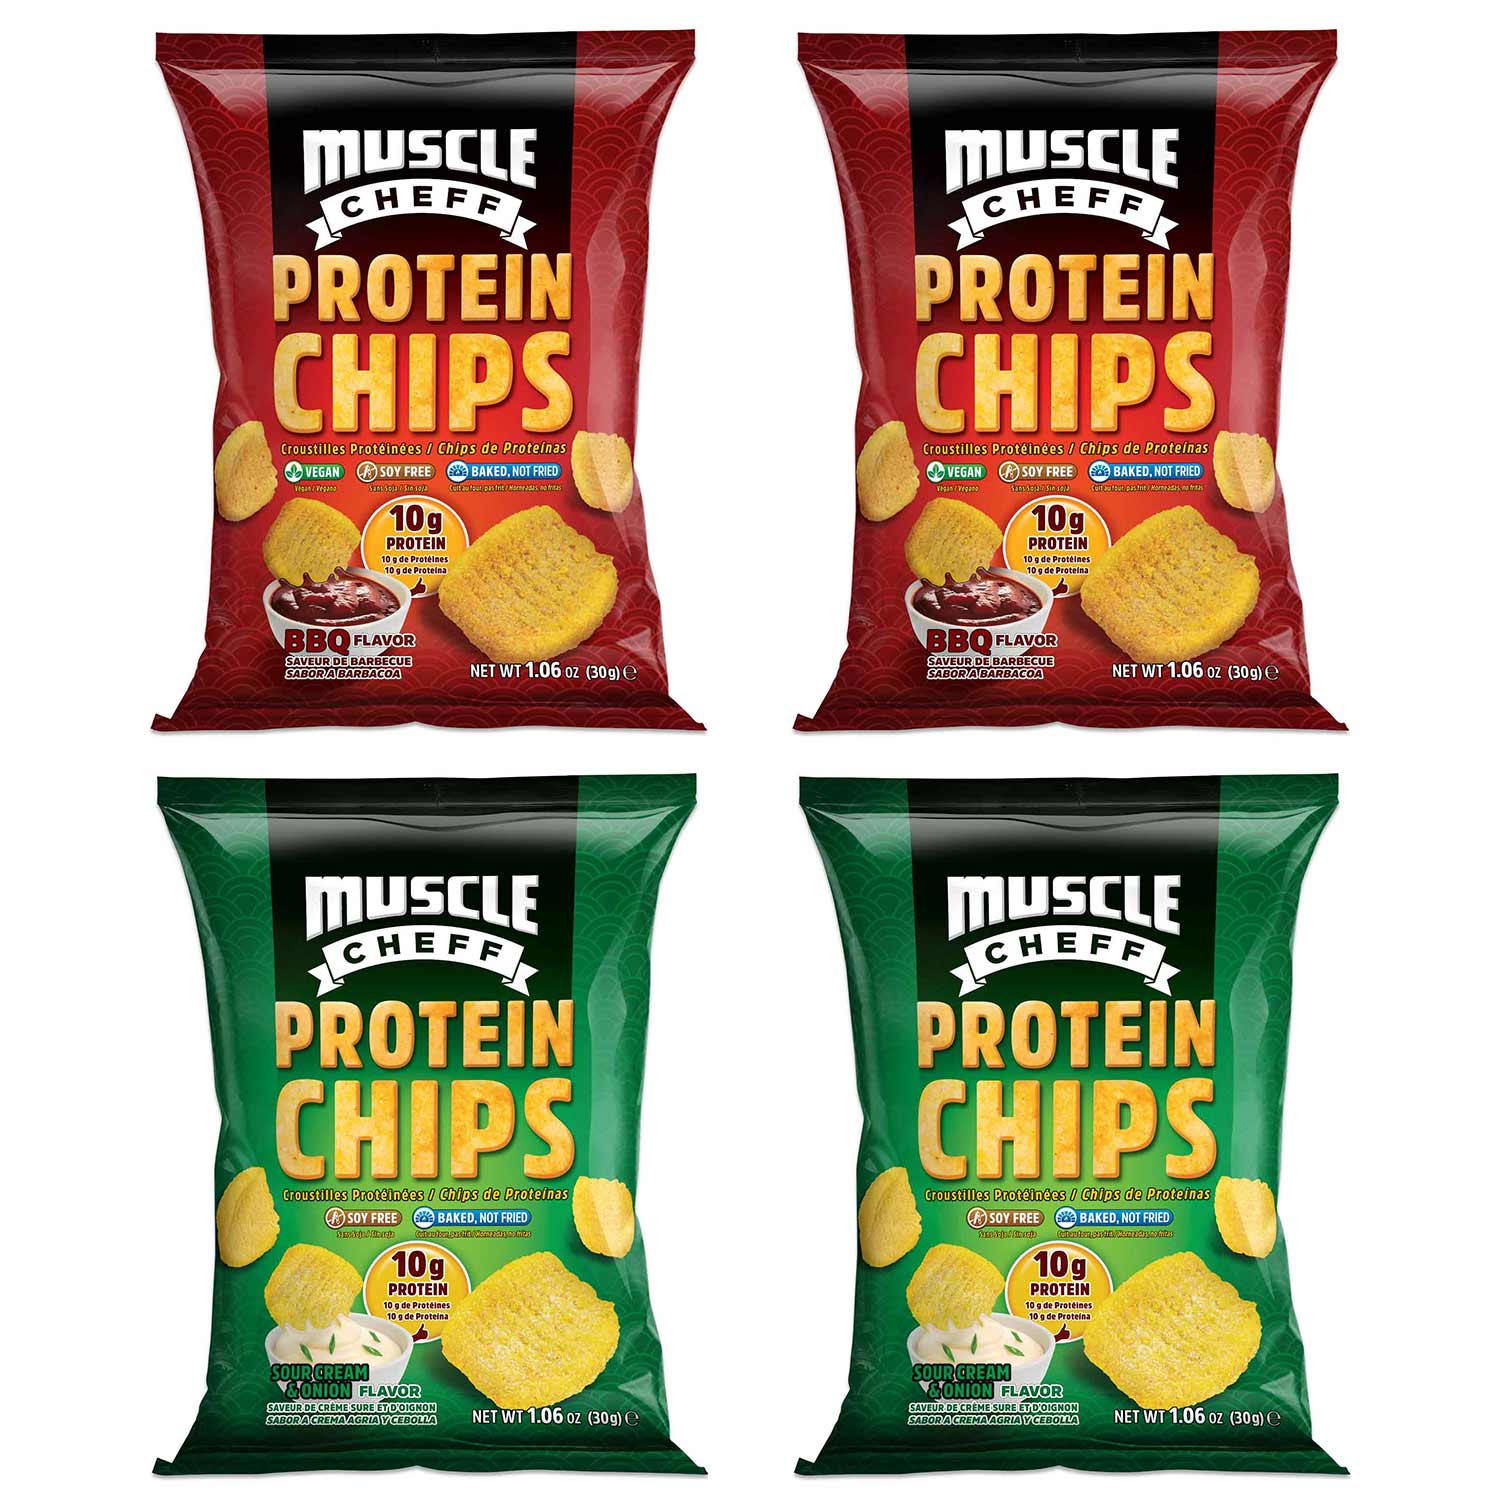 Protein Chips, Soy Free, Muscle Cheff, Fully Baked Pea Protein Chips, High Protein and Fiber, Low Carb, Keto (Variety Pack )